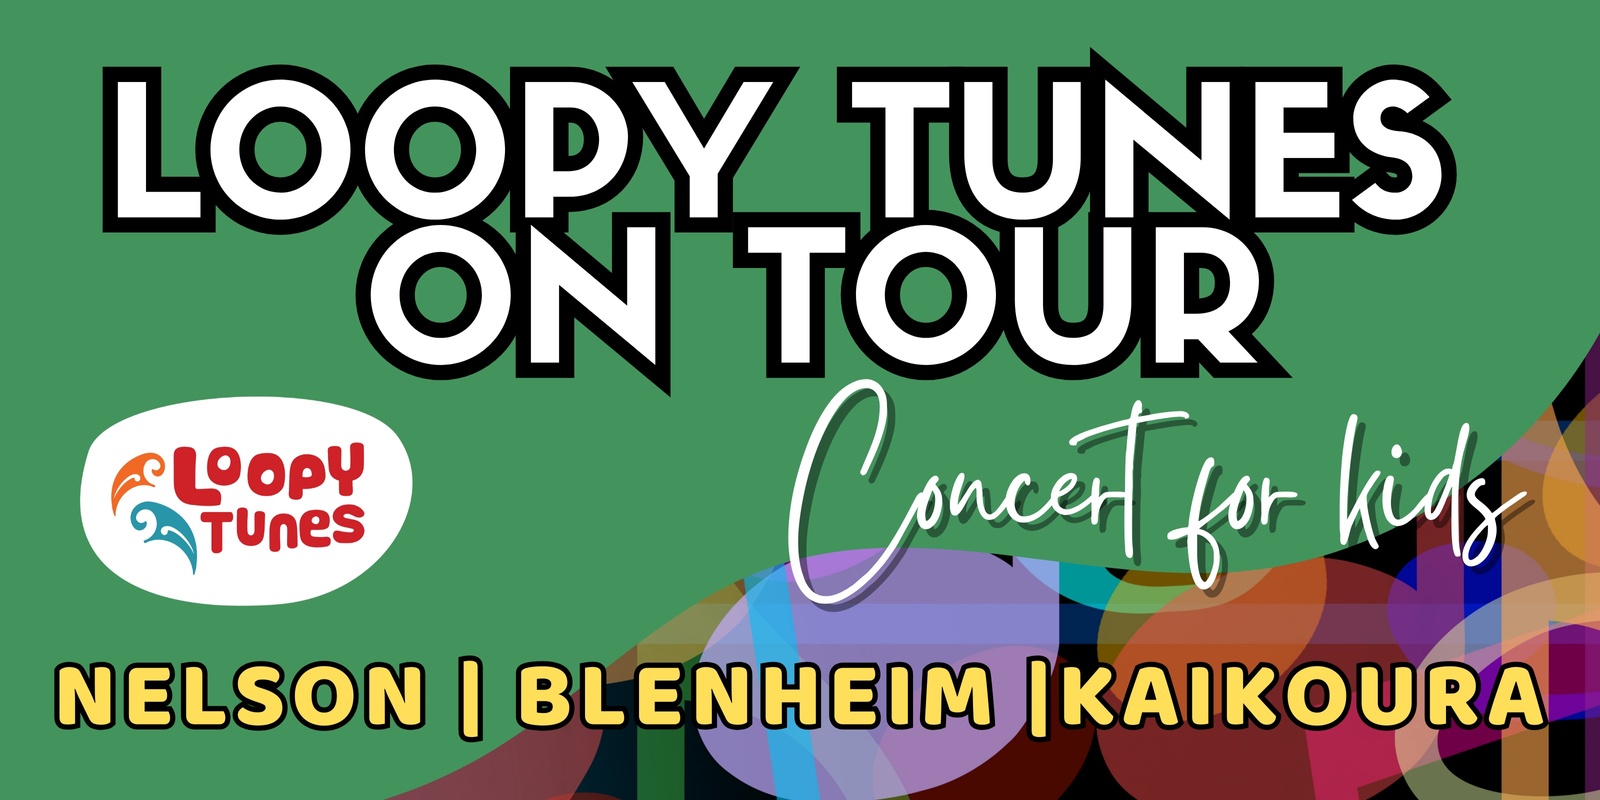 Banner image for Loopy Tunes on Tour - Concert for Kids! [Blenheim]